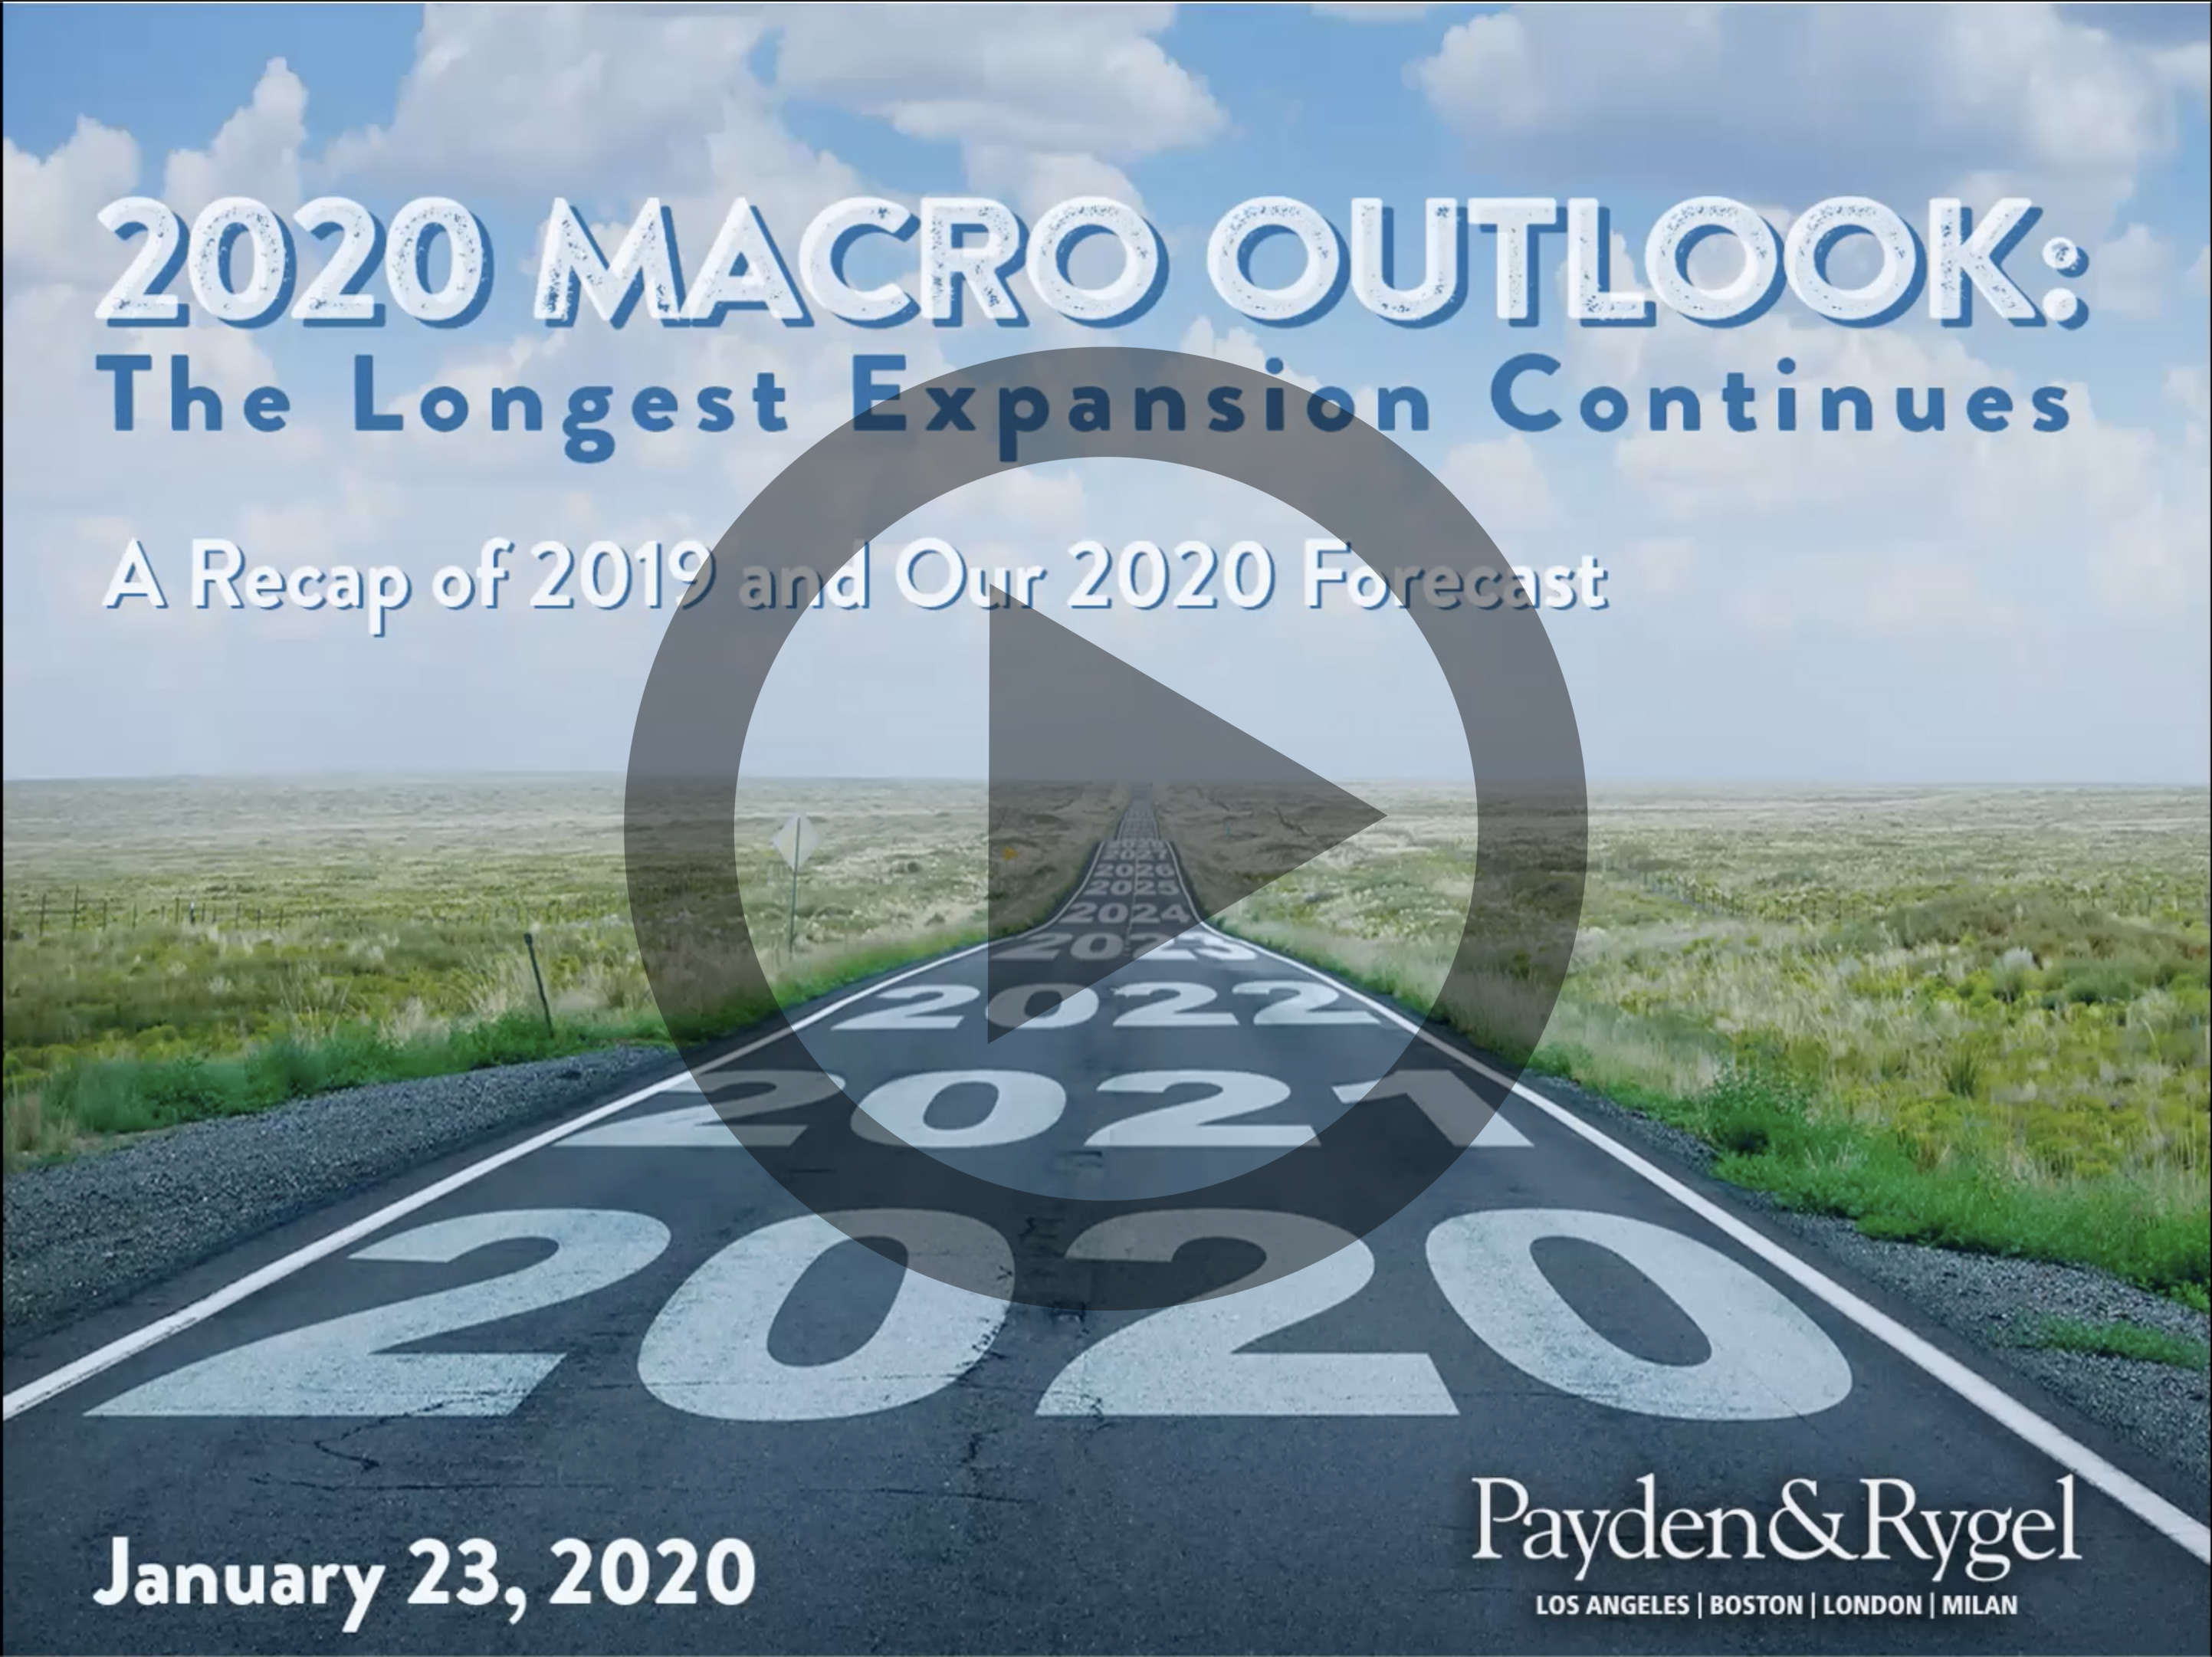 2020 Macro Outlook: The Longest Expansion Continues